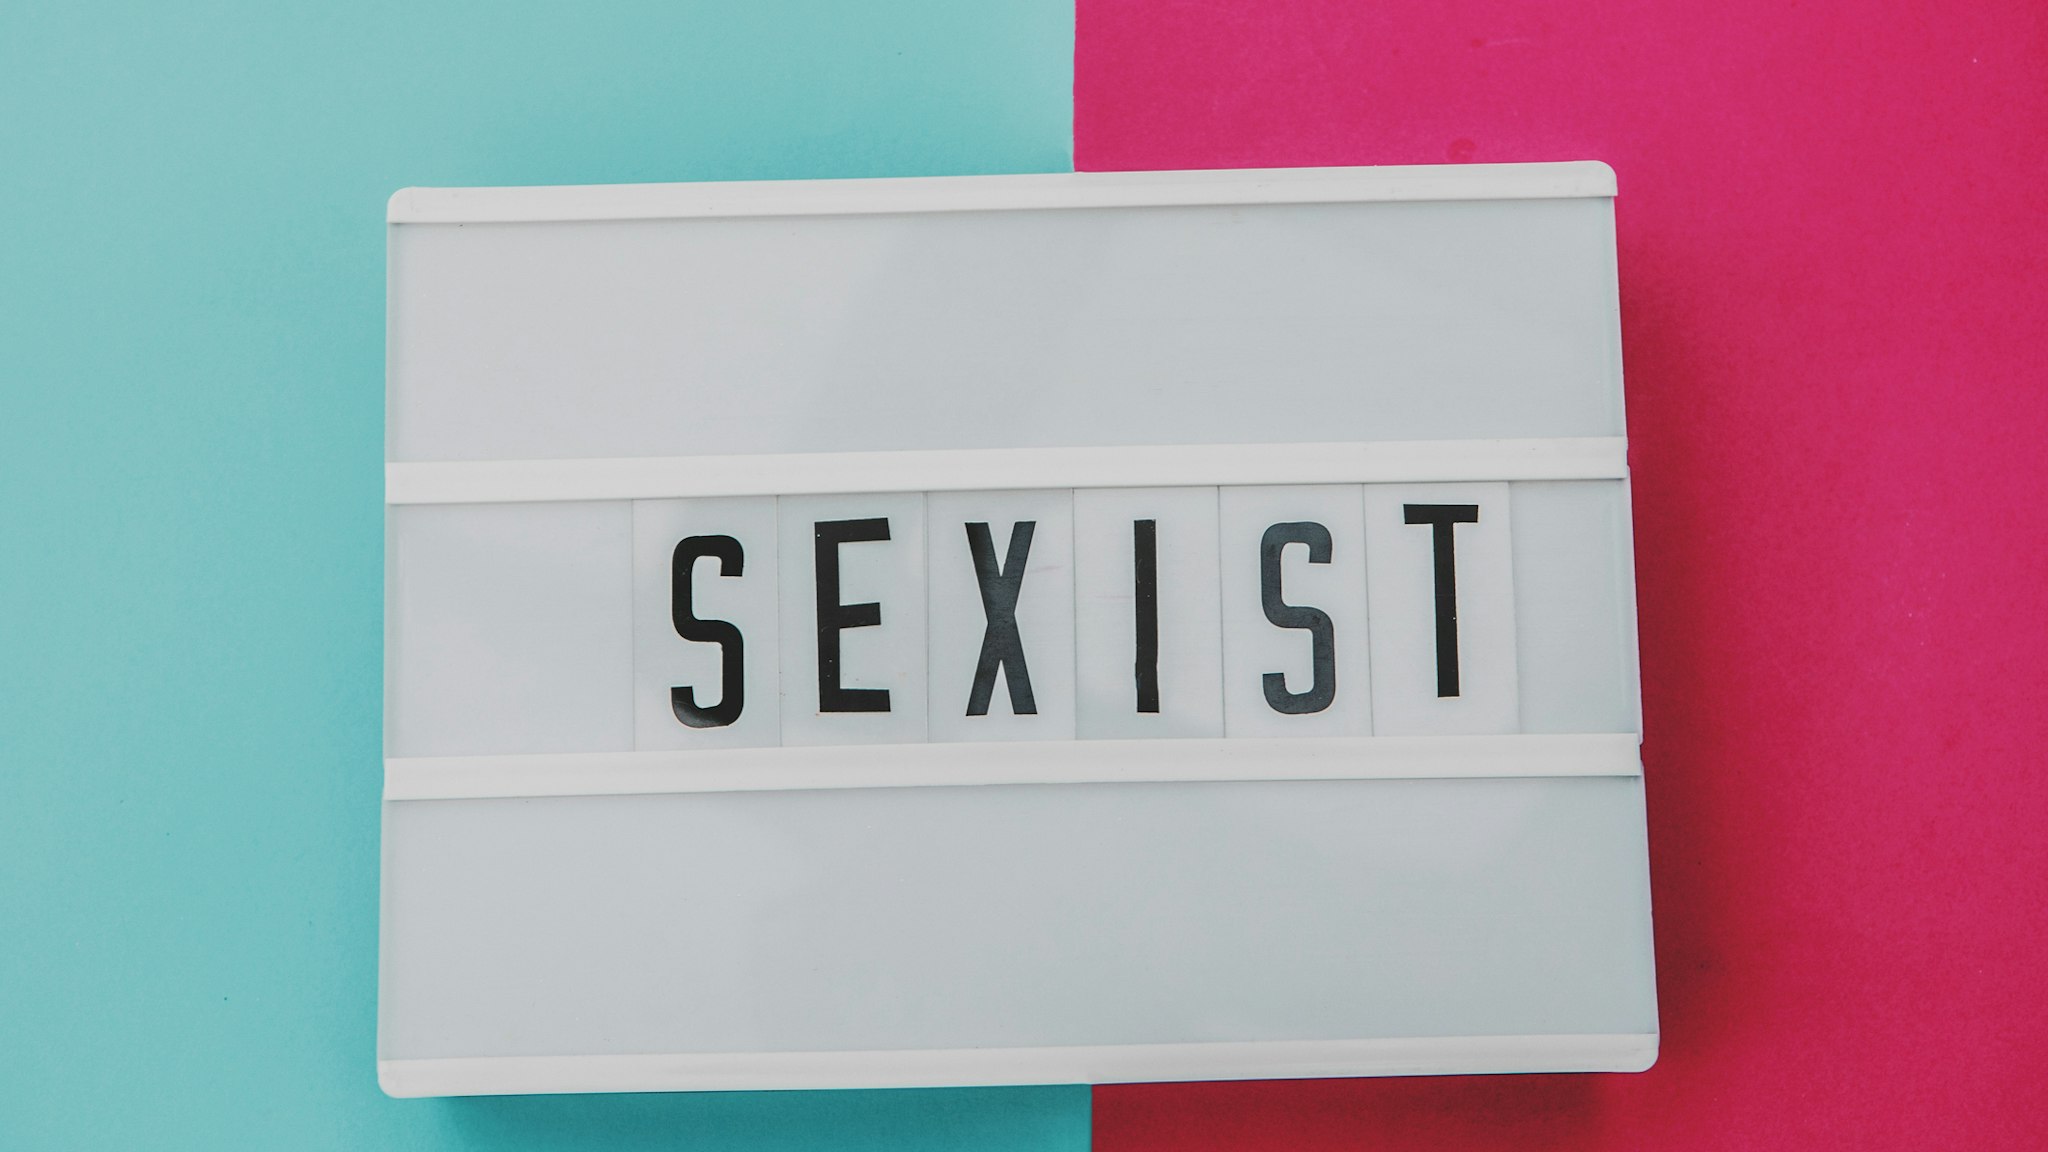 sexist word in pink and blue background